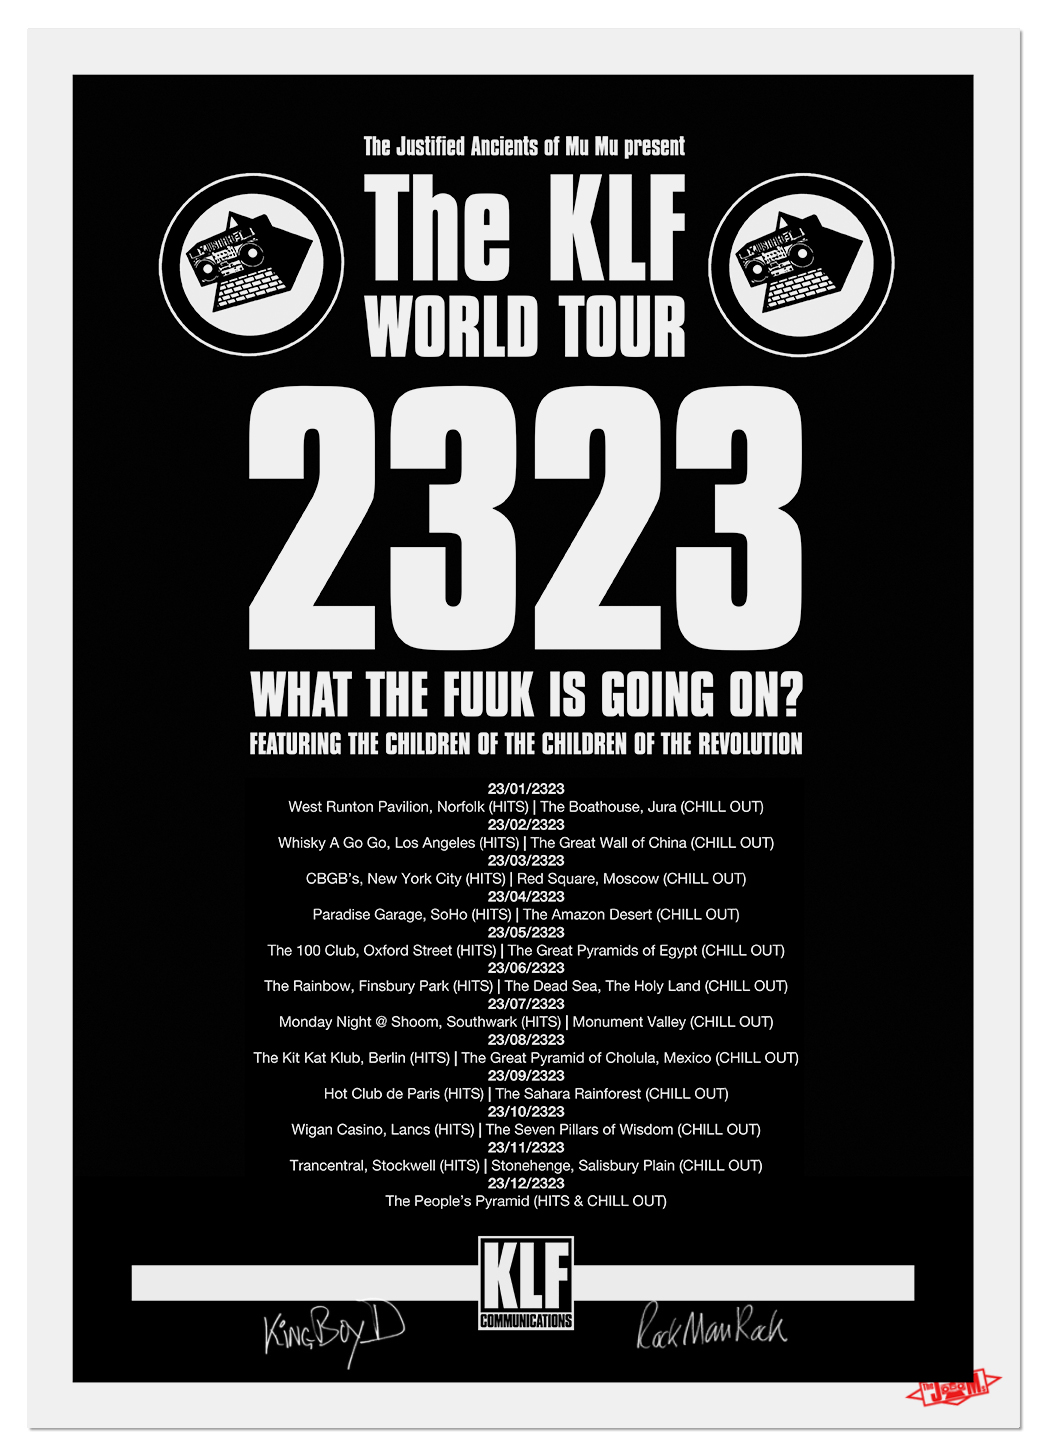 The KLF 2323 Tour Poster NEW white on black SIGNED